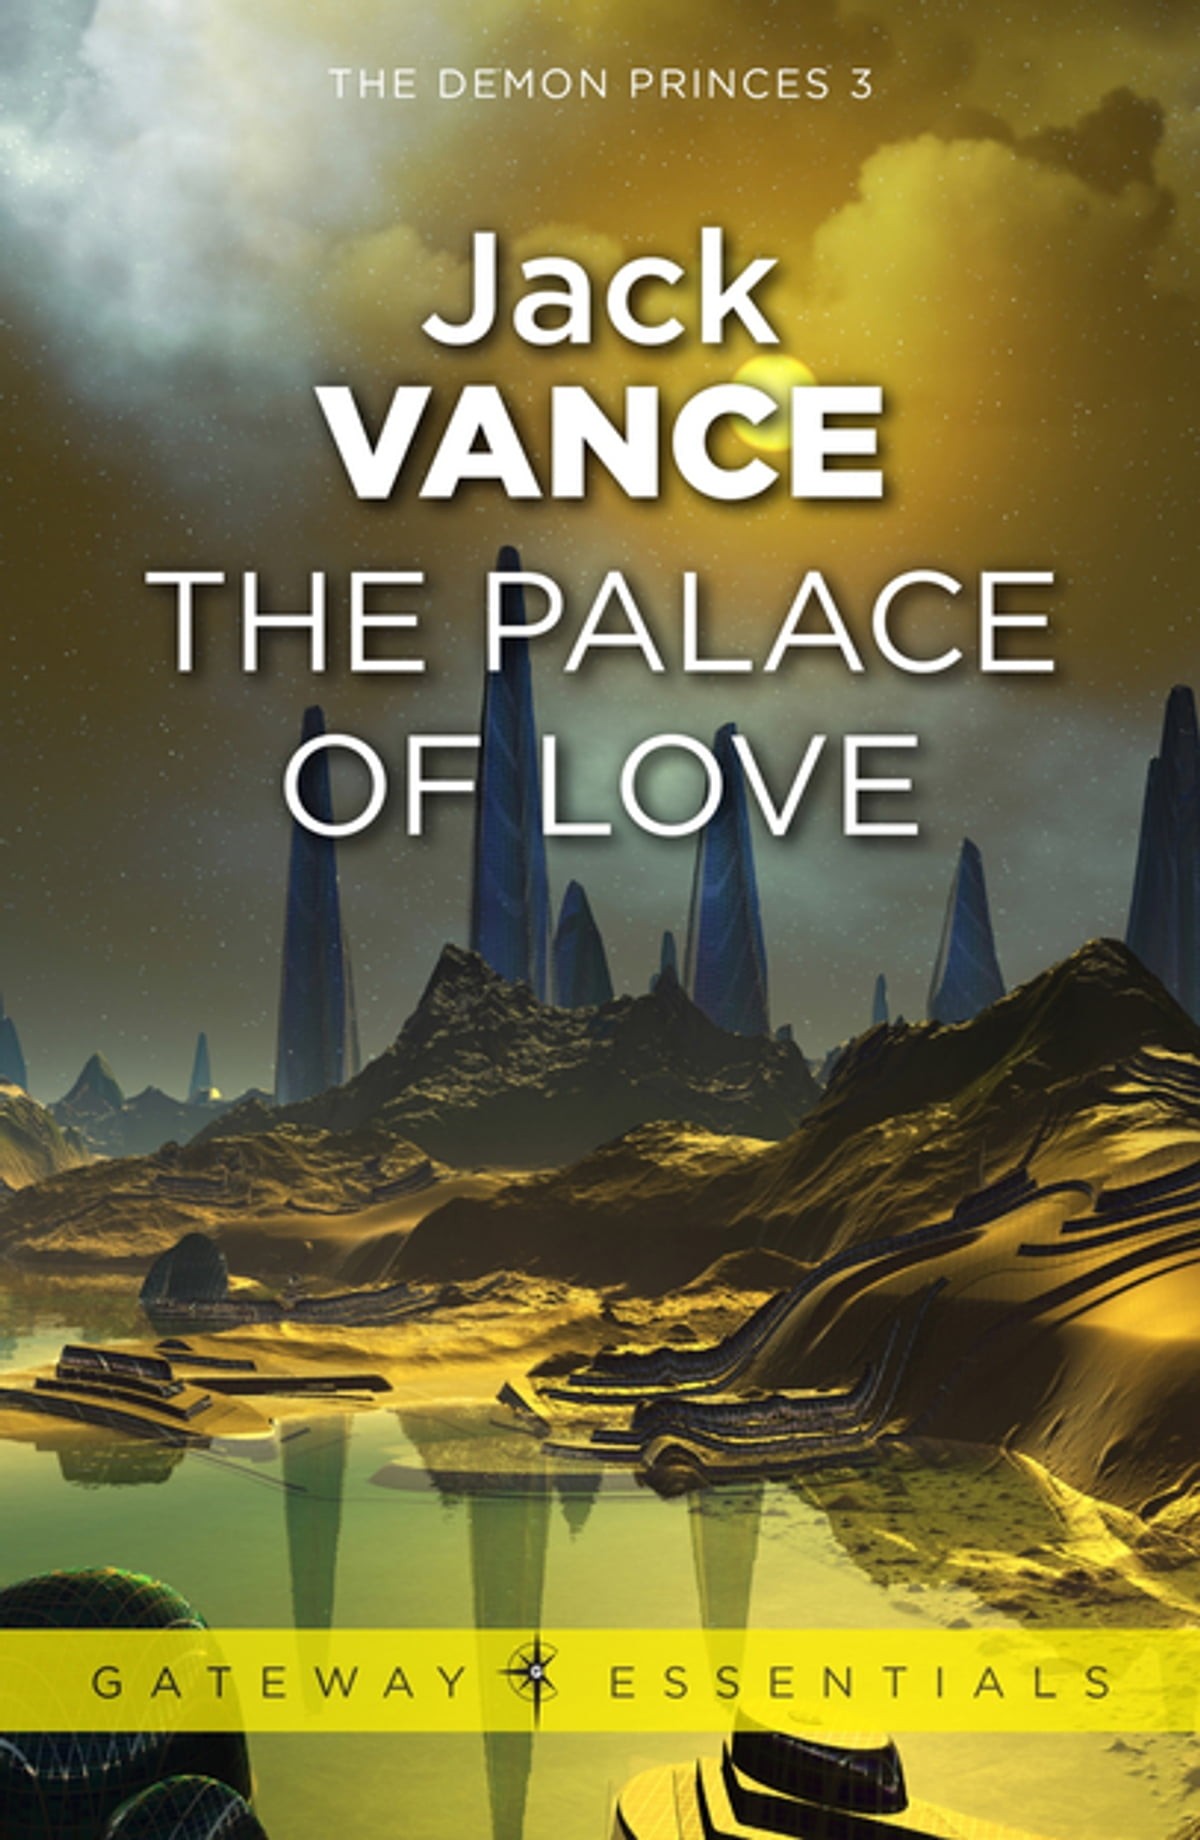 The Palace of Love